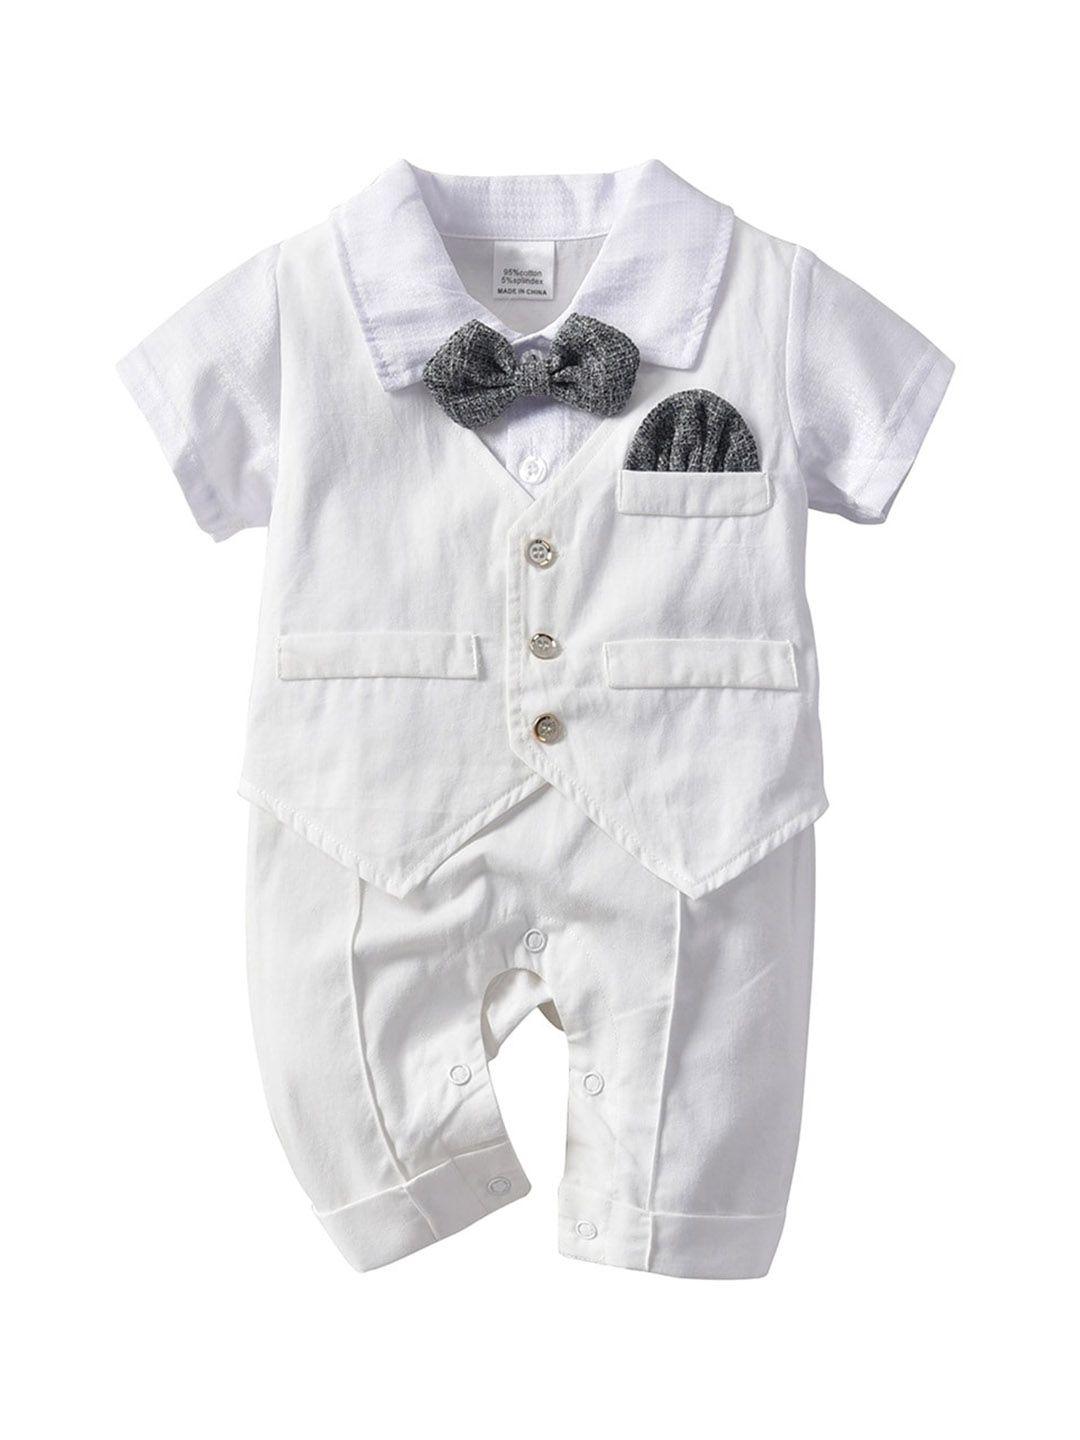 stylecast white infant boys shirt collar short sleeves pure cotton rompers